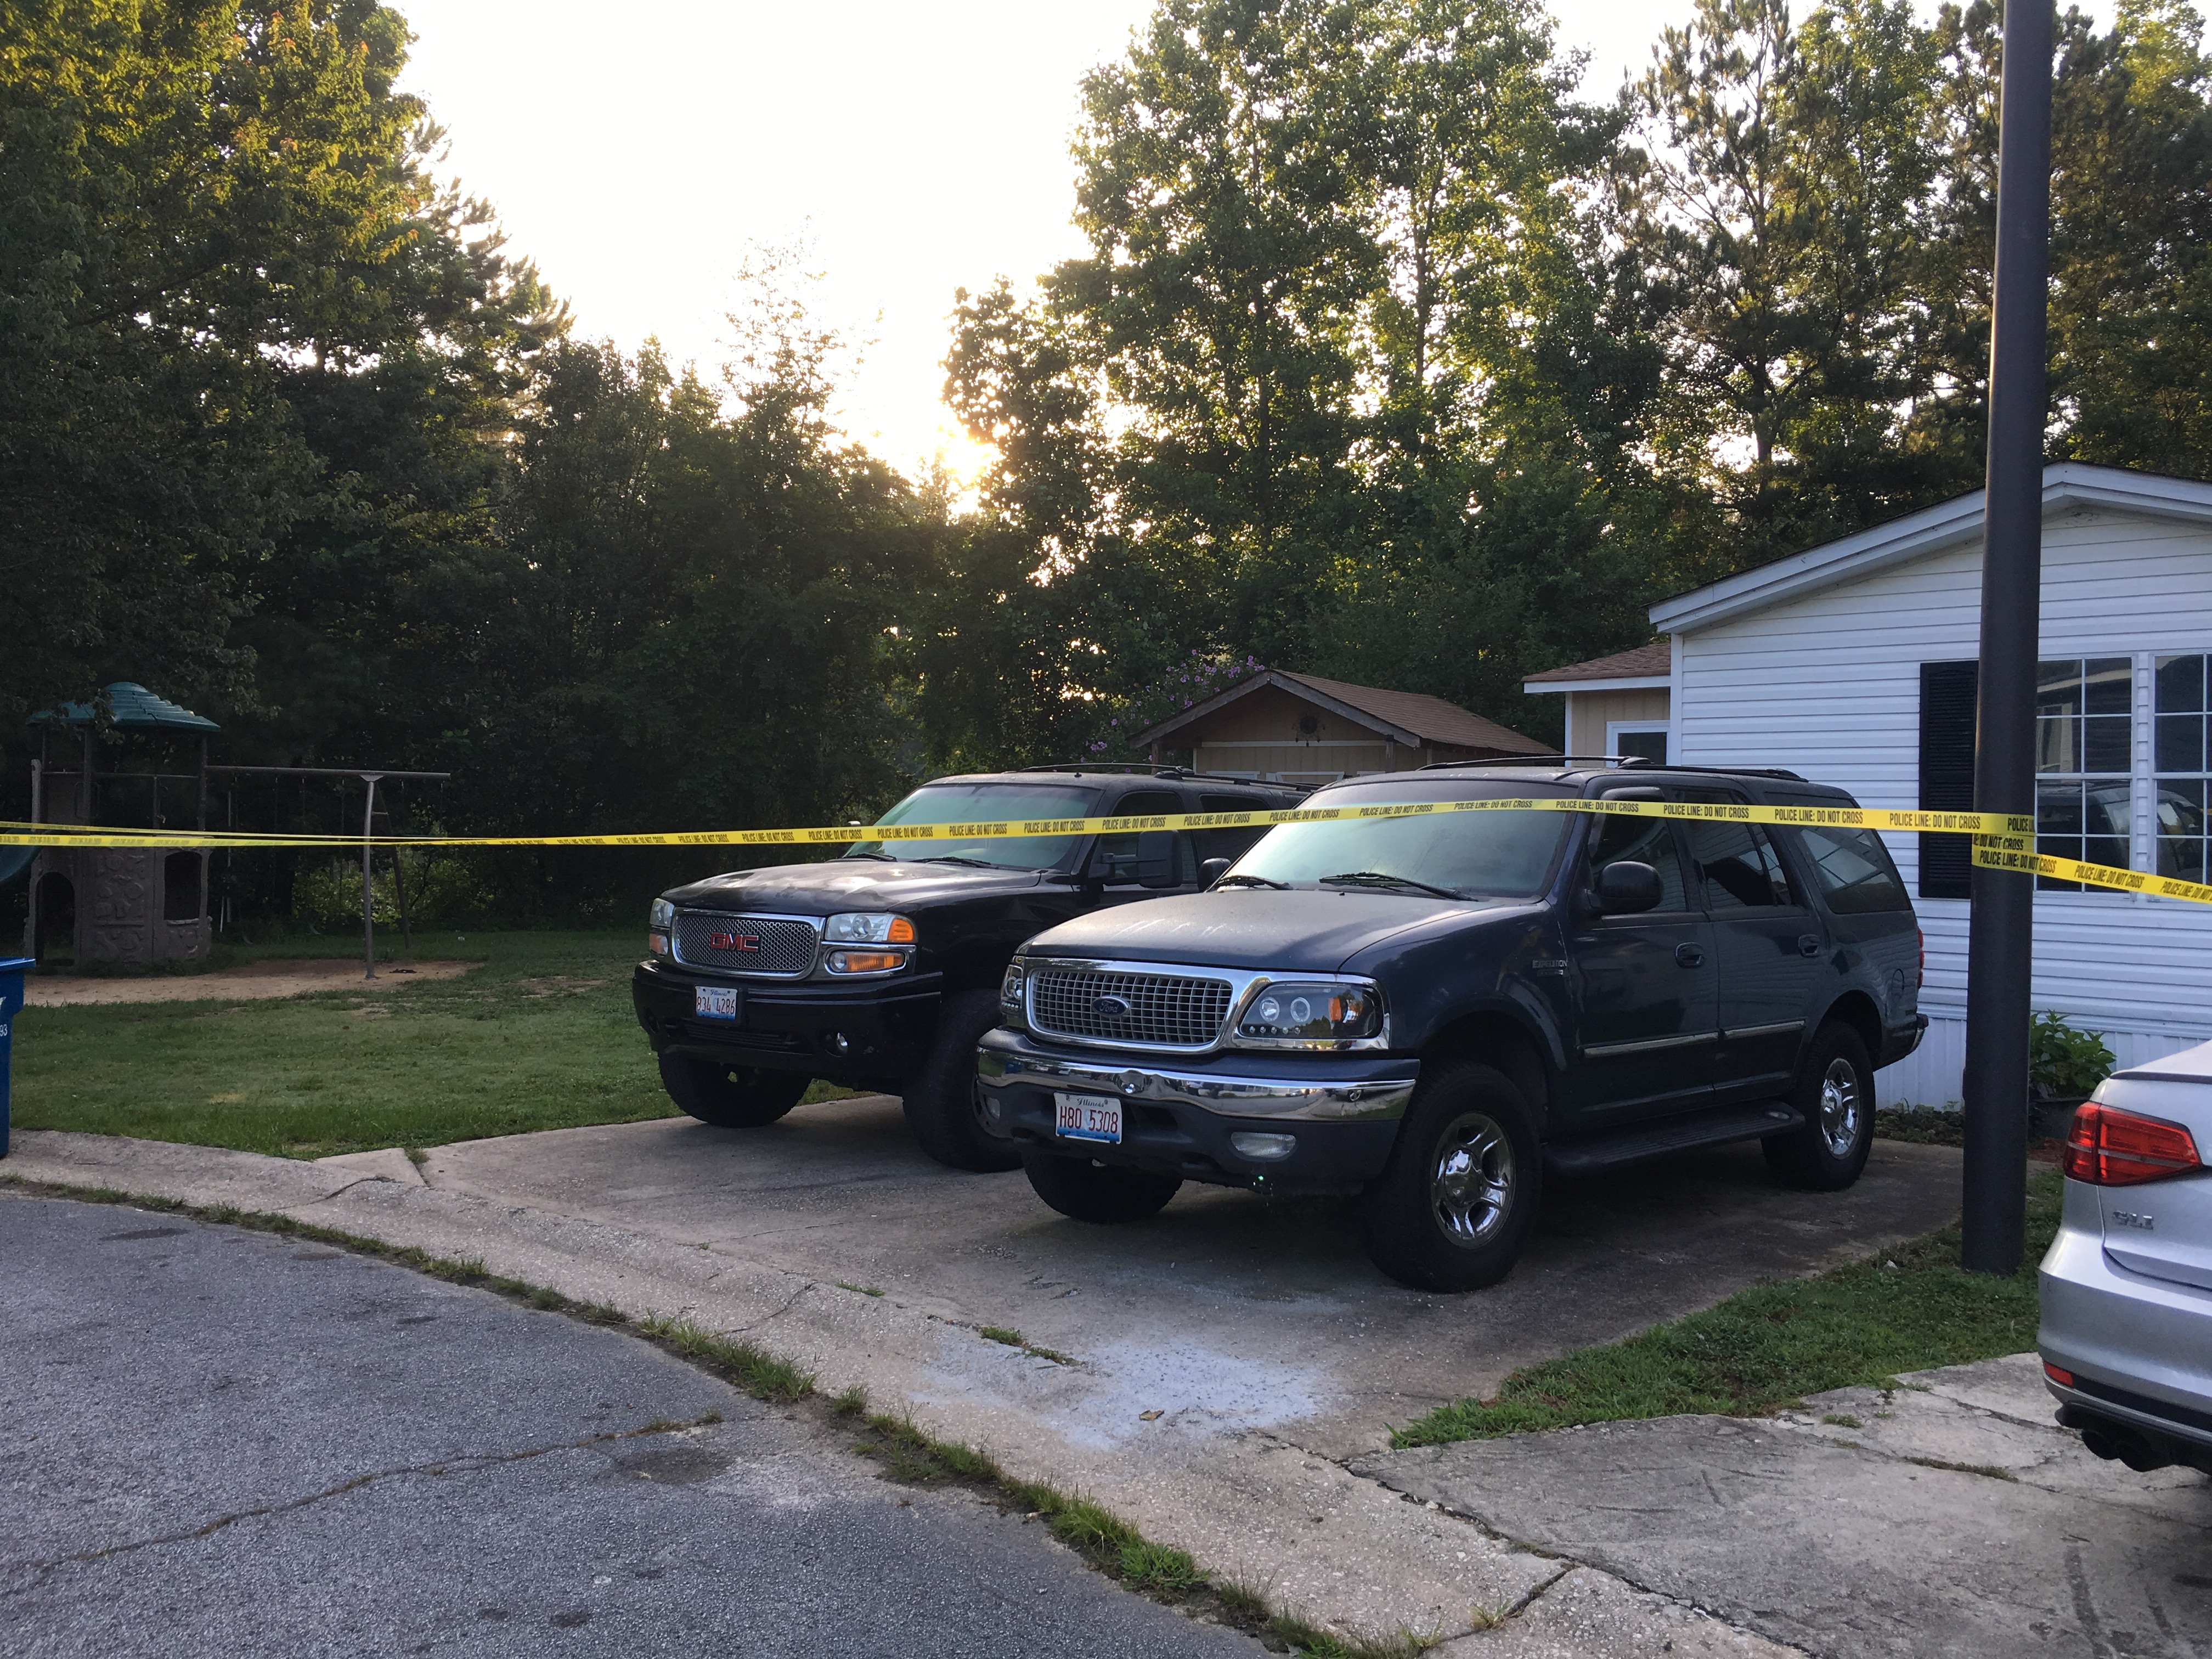 The outside of the house in Loganville where the bodies were found on Thursday, July 6. (Courtesy of Gwinnett County Police Department)